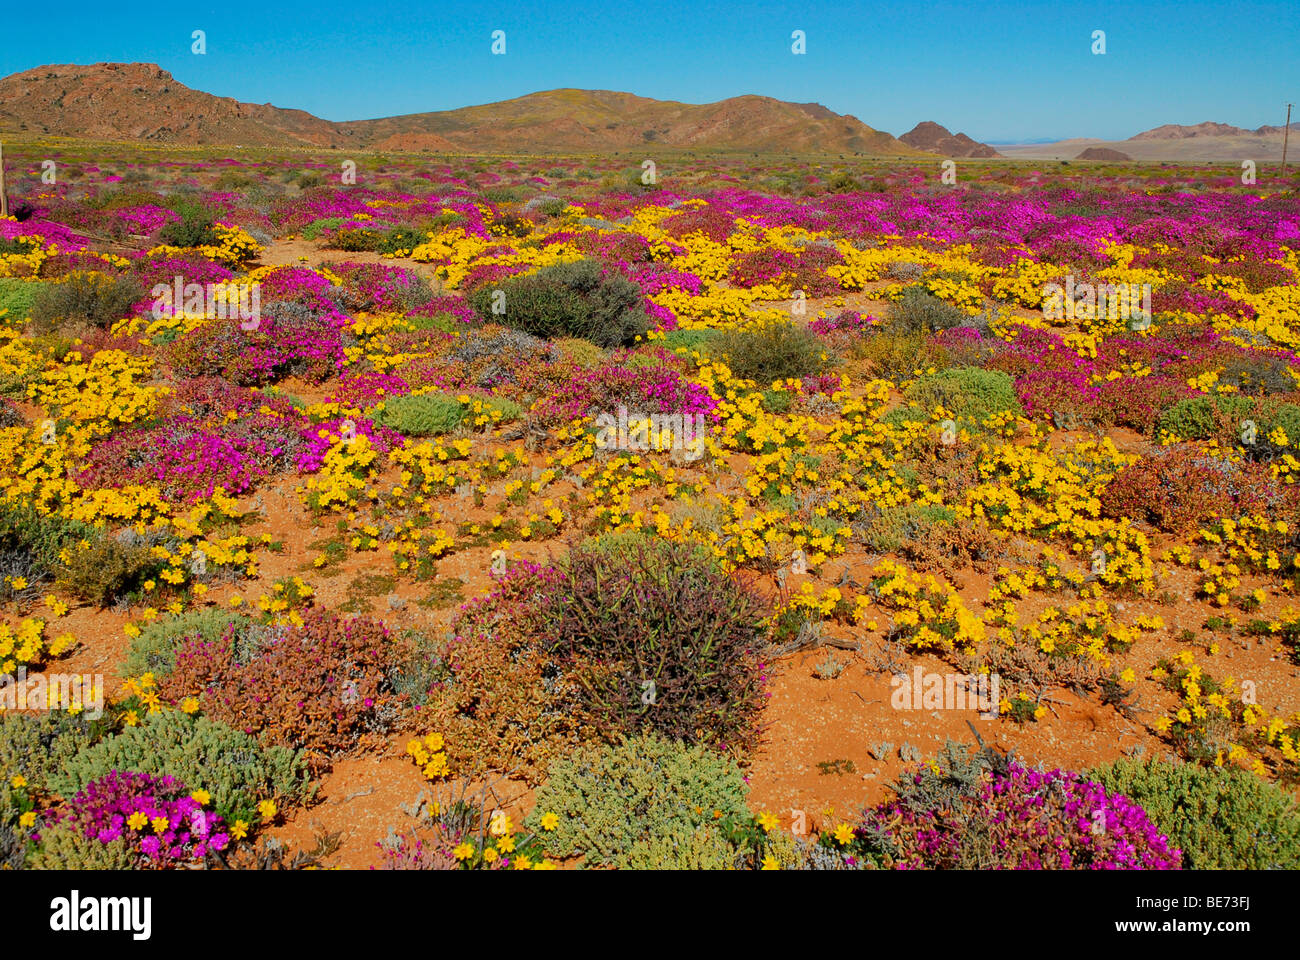 Flowers after heavy rainfall in the Succulent Karoo, Namaqualand, near Aus, Namibia, Africa Stock Photo